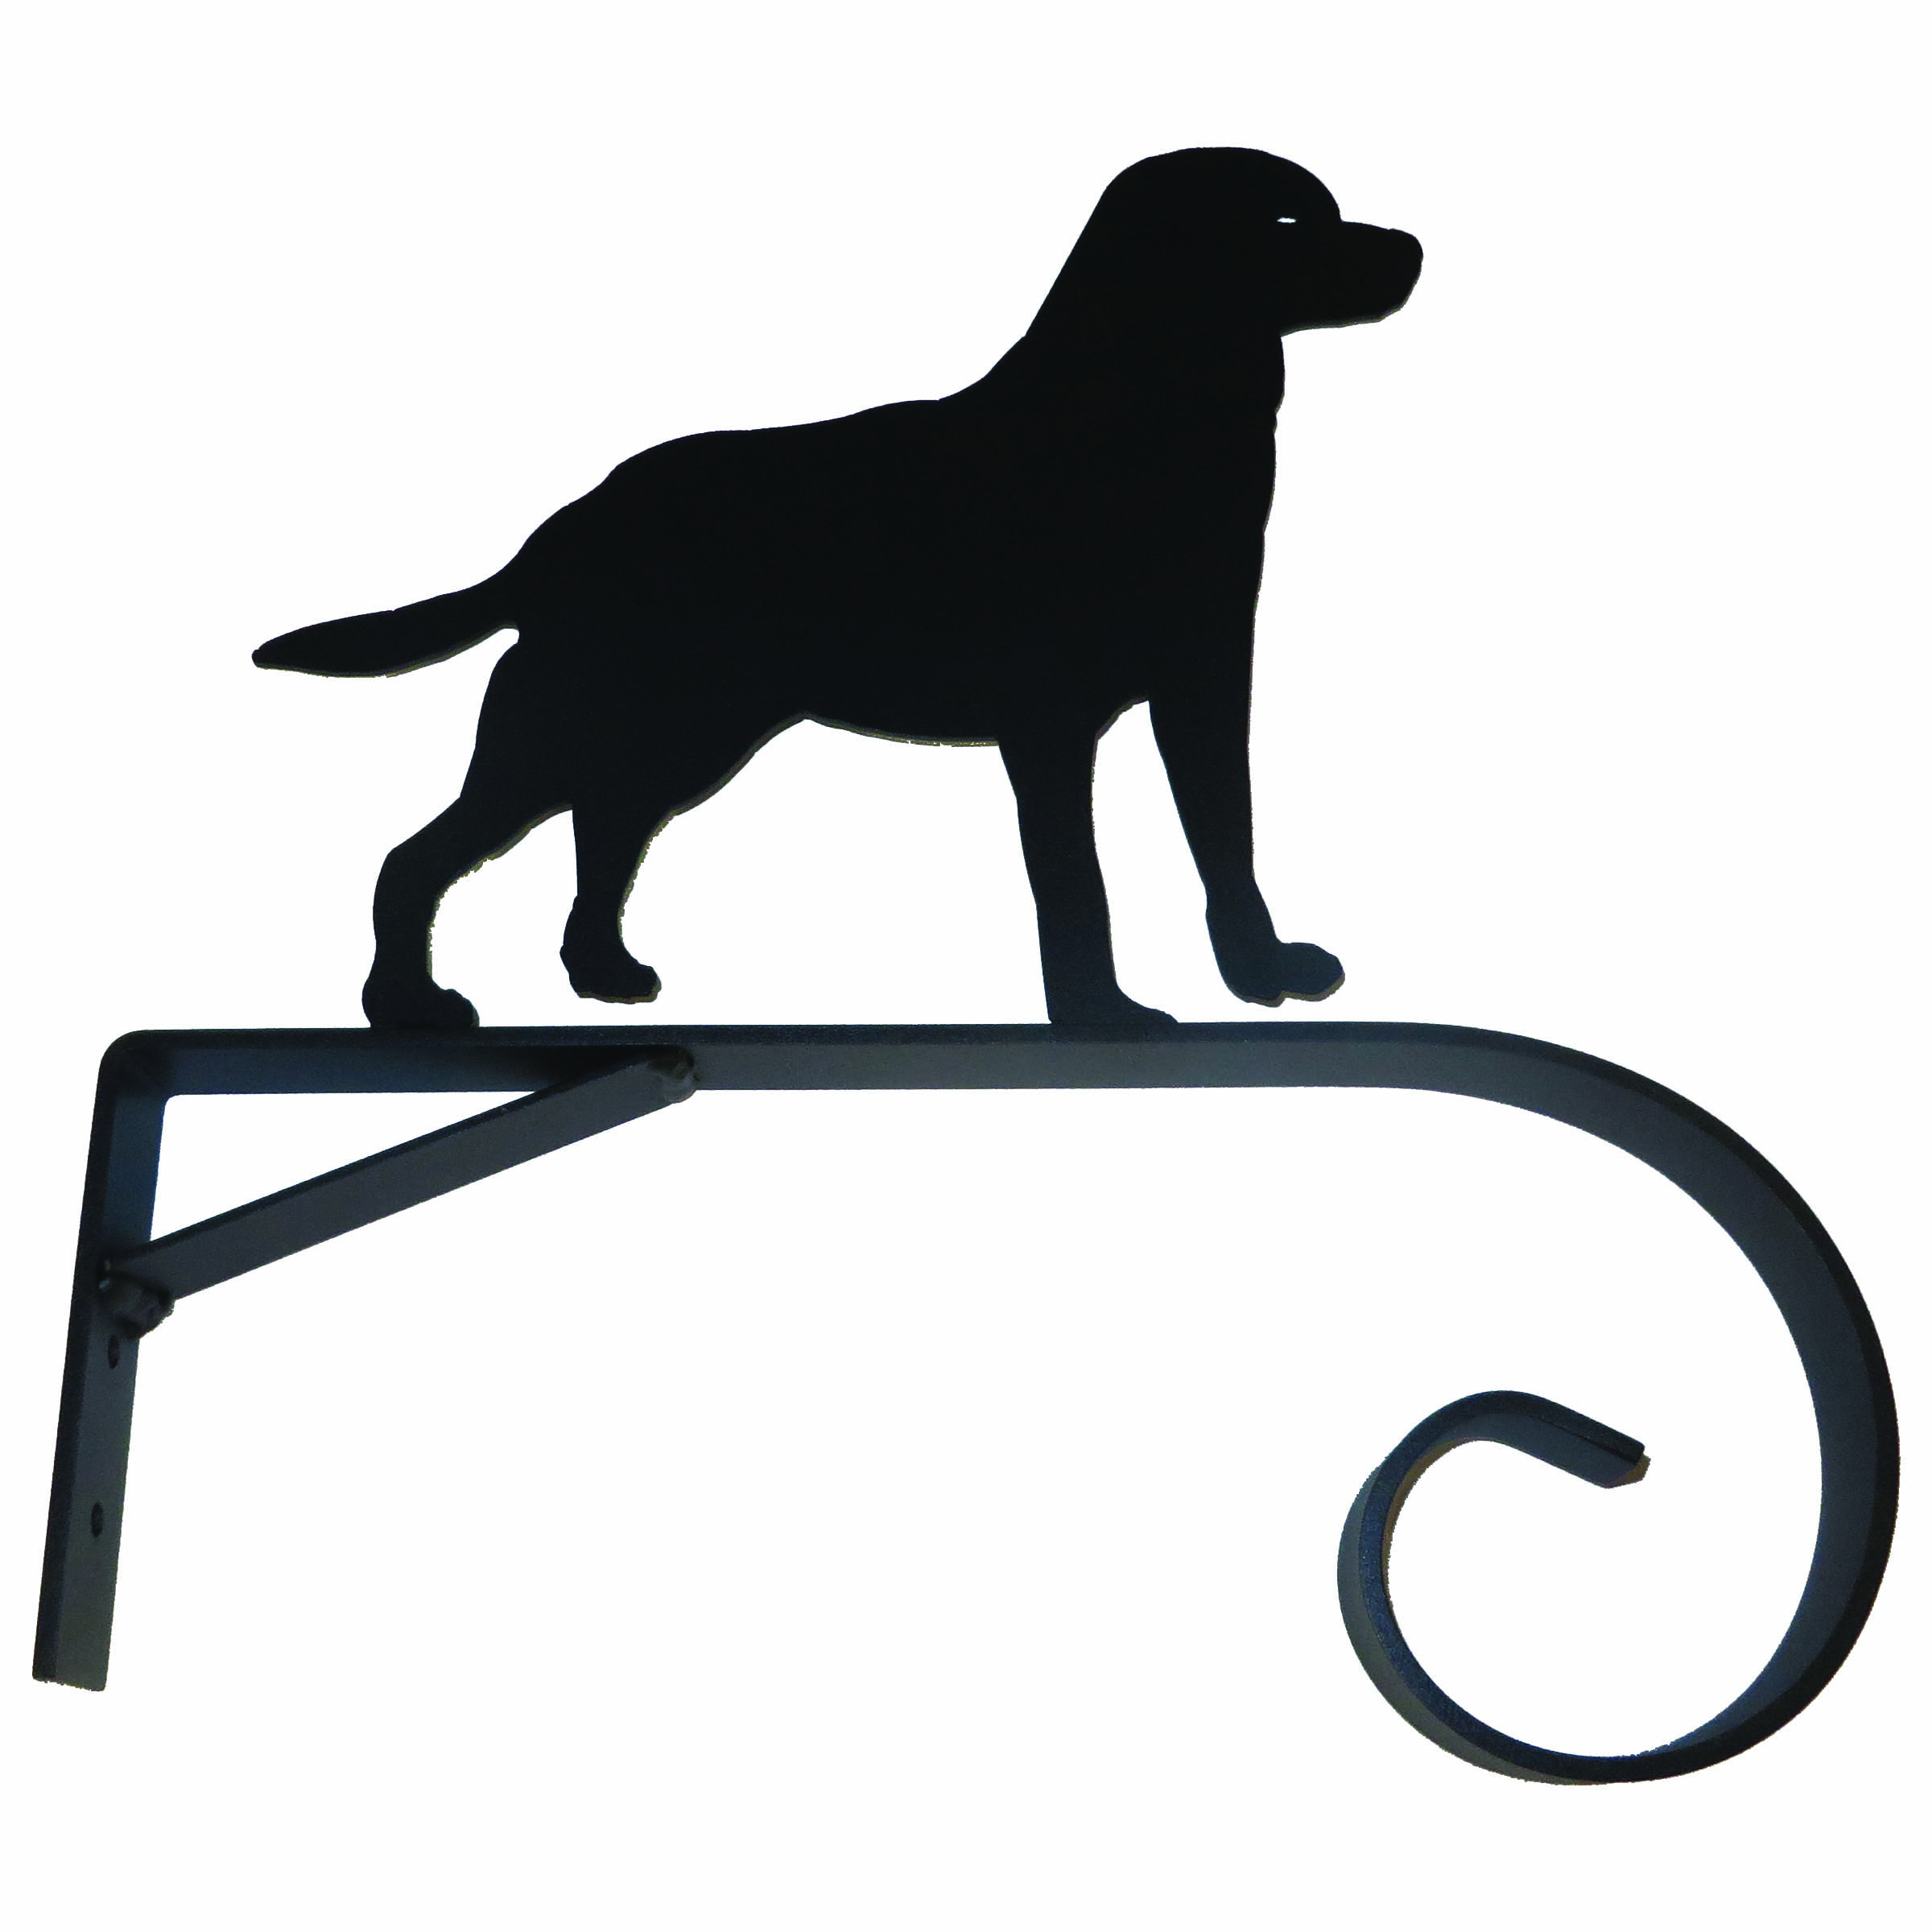 NORTH COUNTRY Handcrafted Hanger Bracket - Black Lab